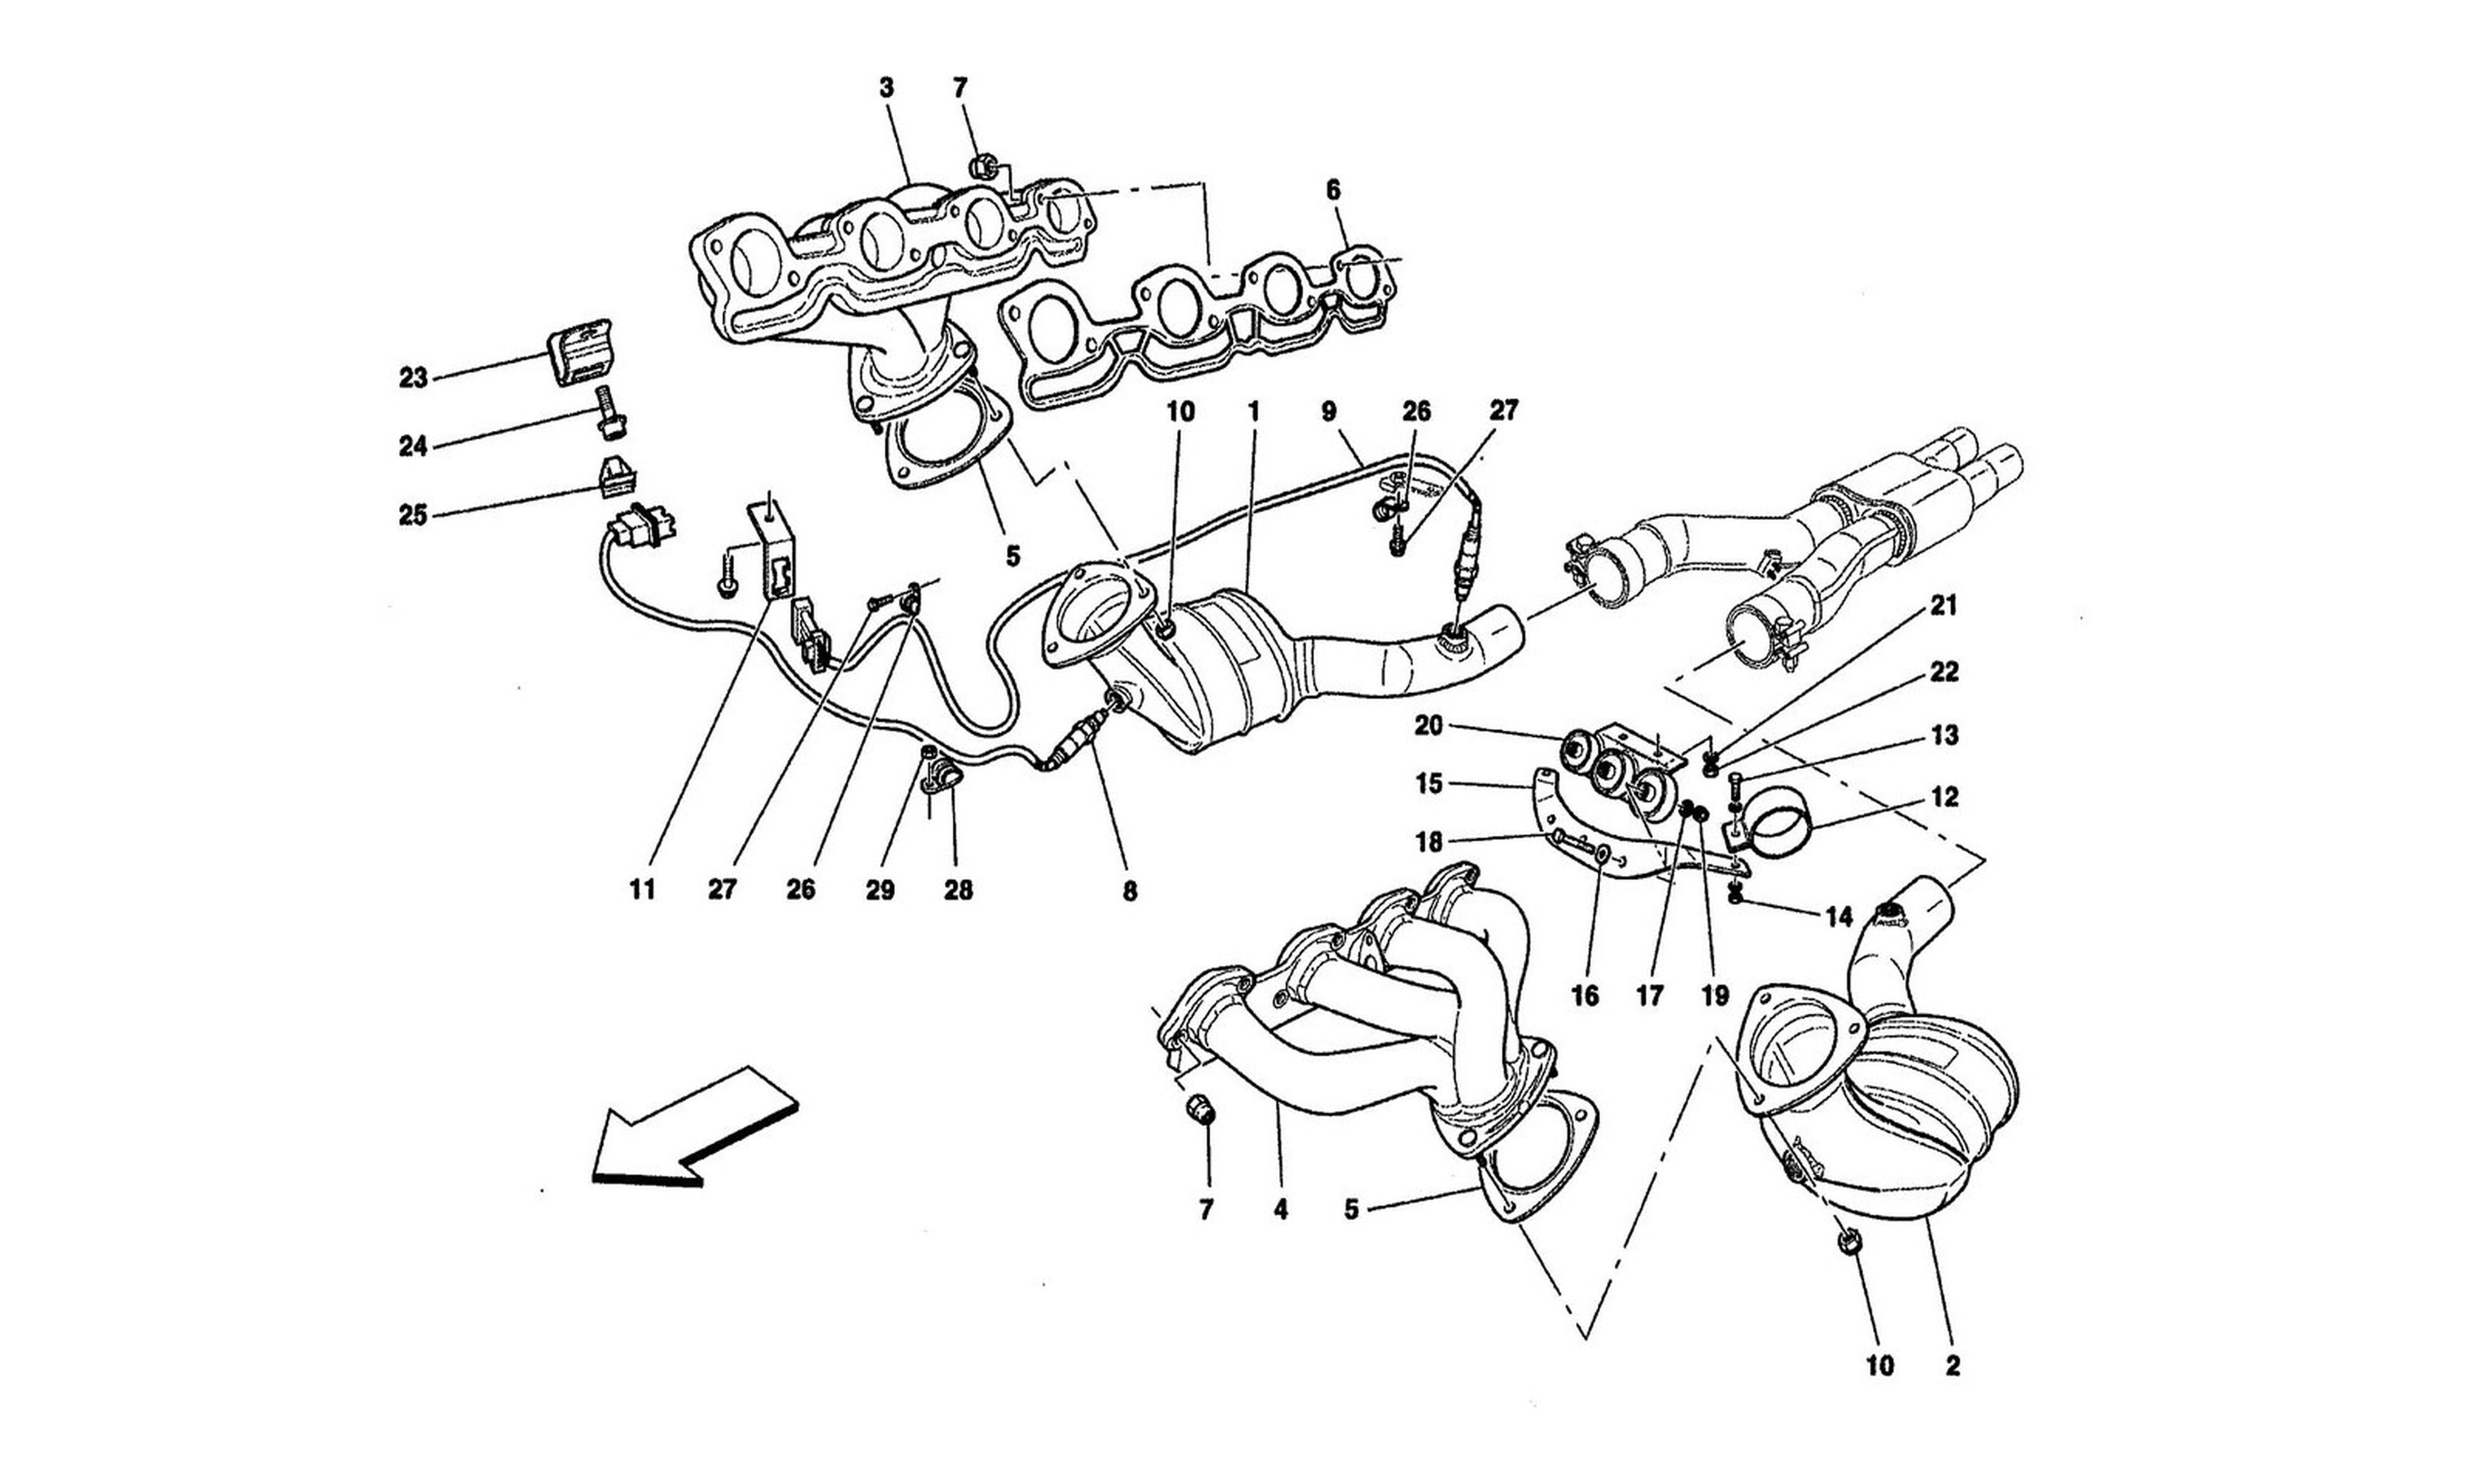 Schematic: Pre-Catalytic Converters And Catalytic Converters